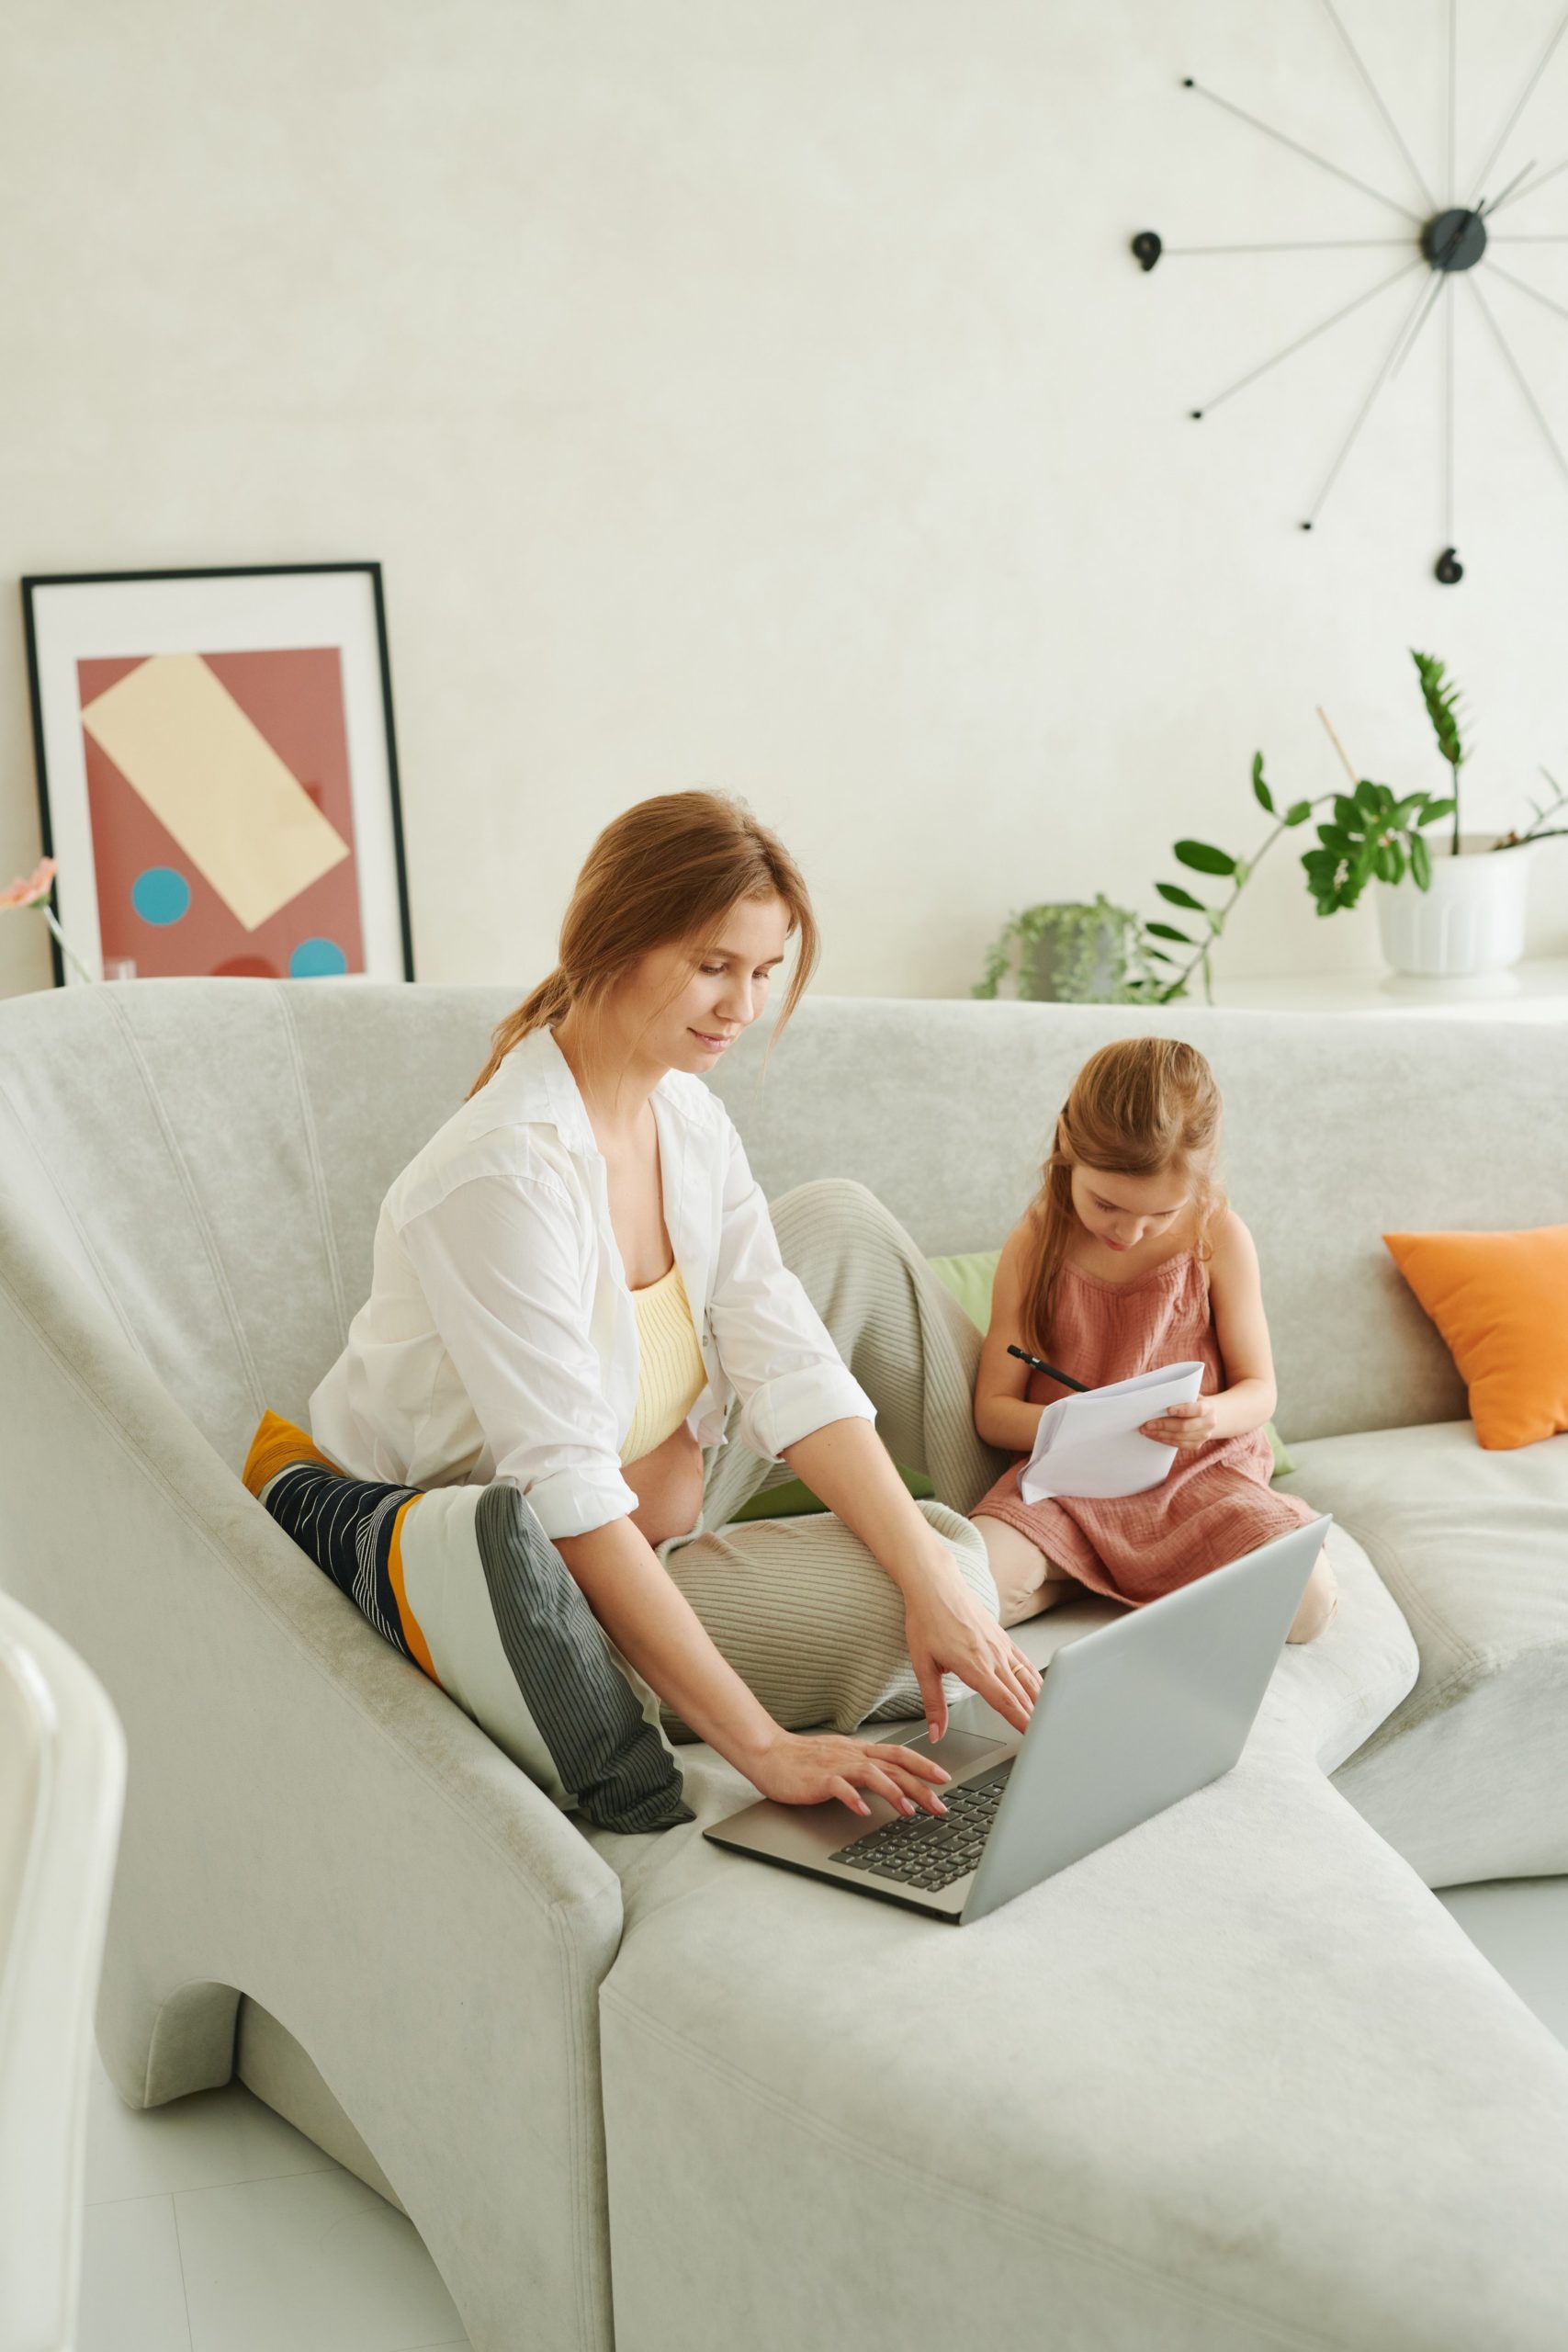 woman sitting on sofa using a computer while a young child sits next to her drawing on paper